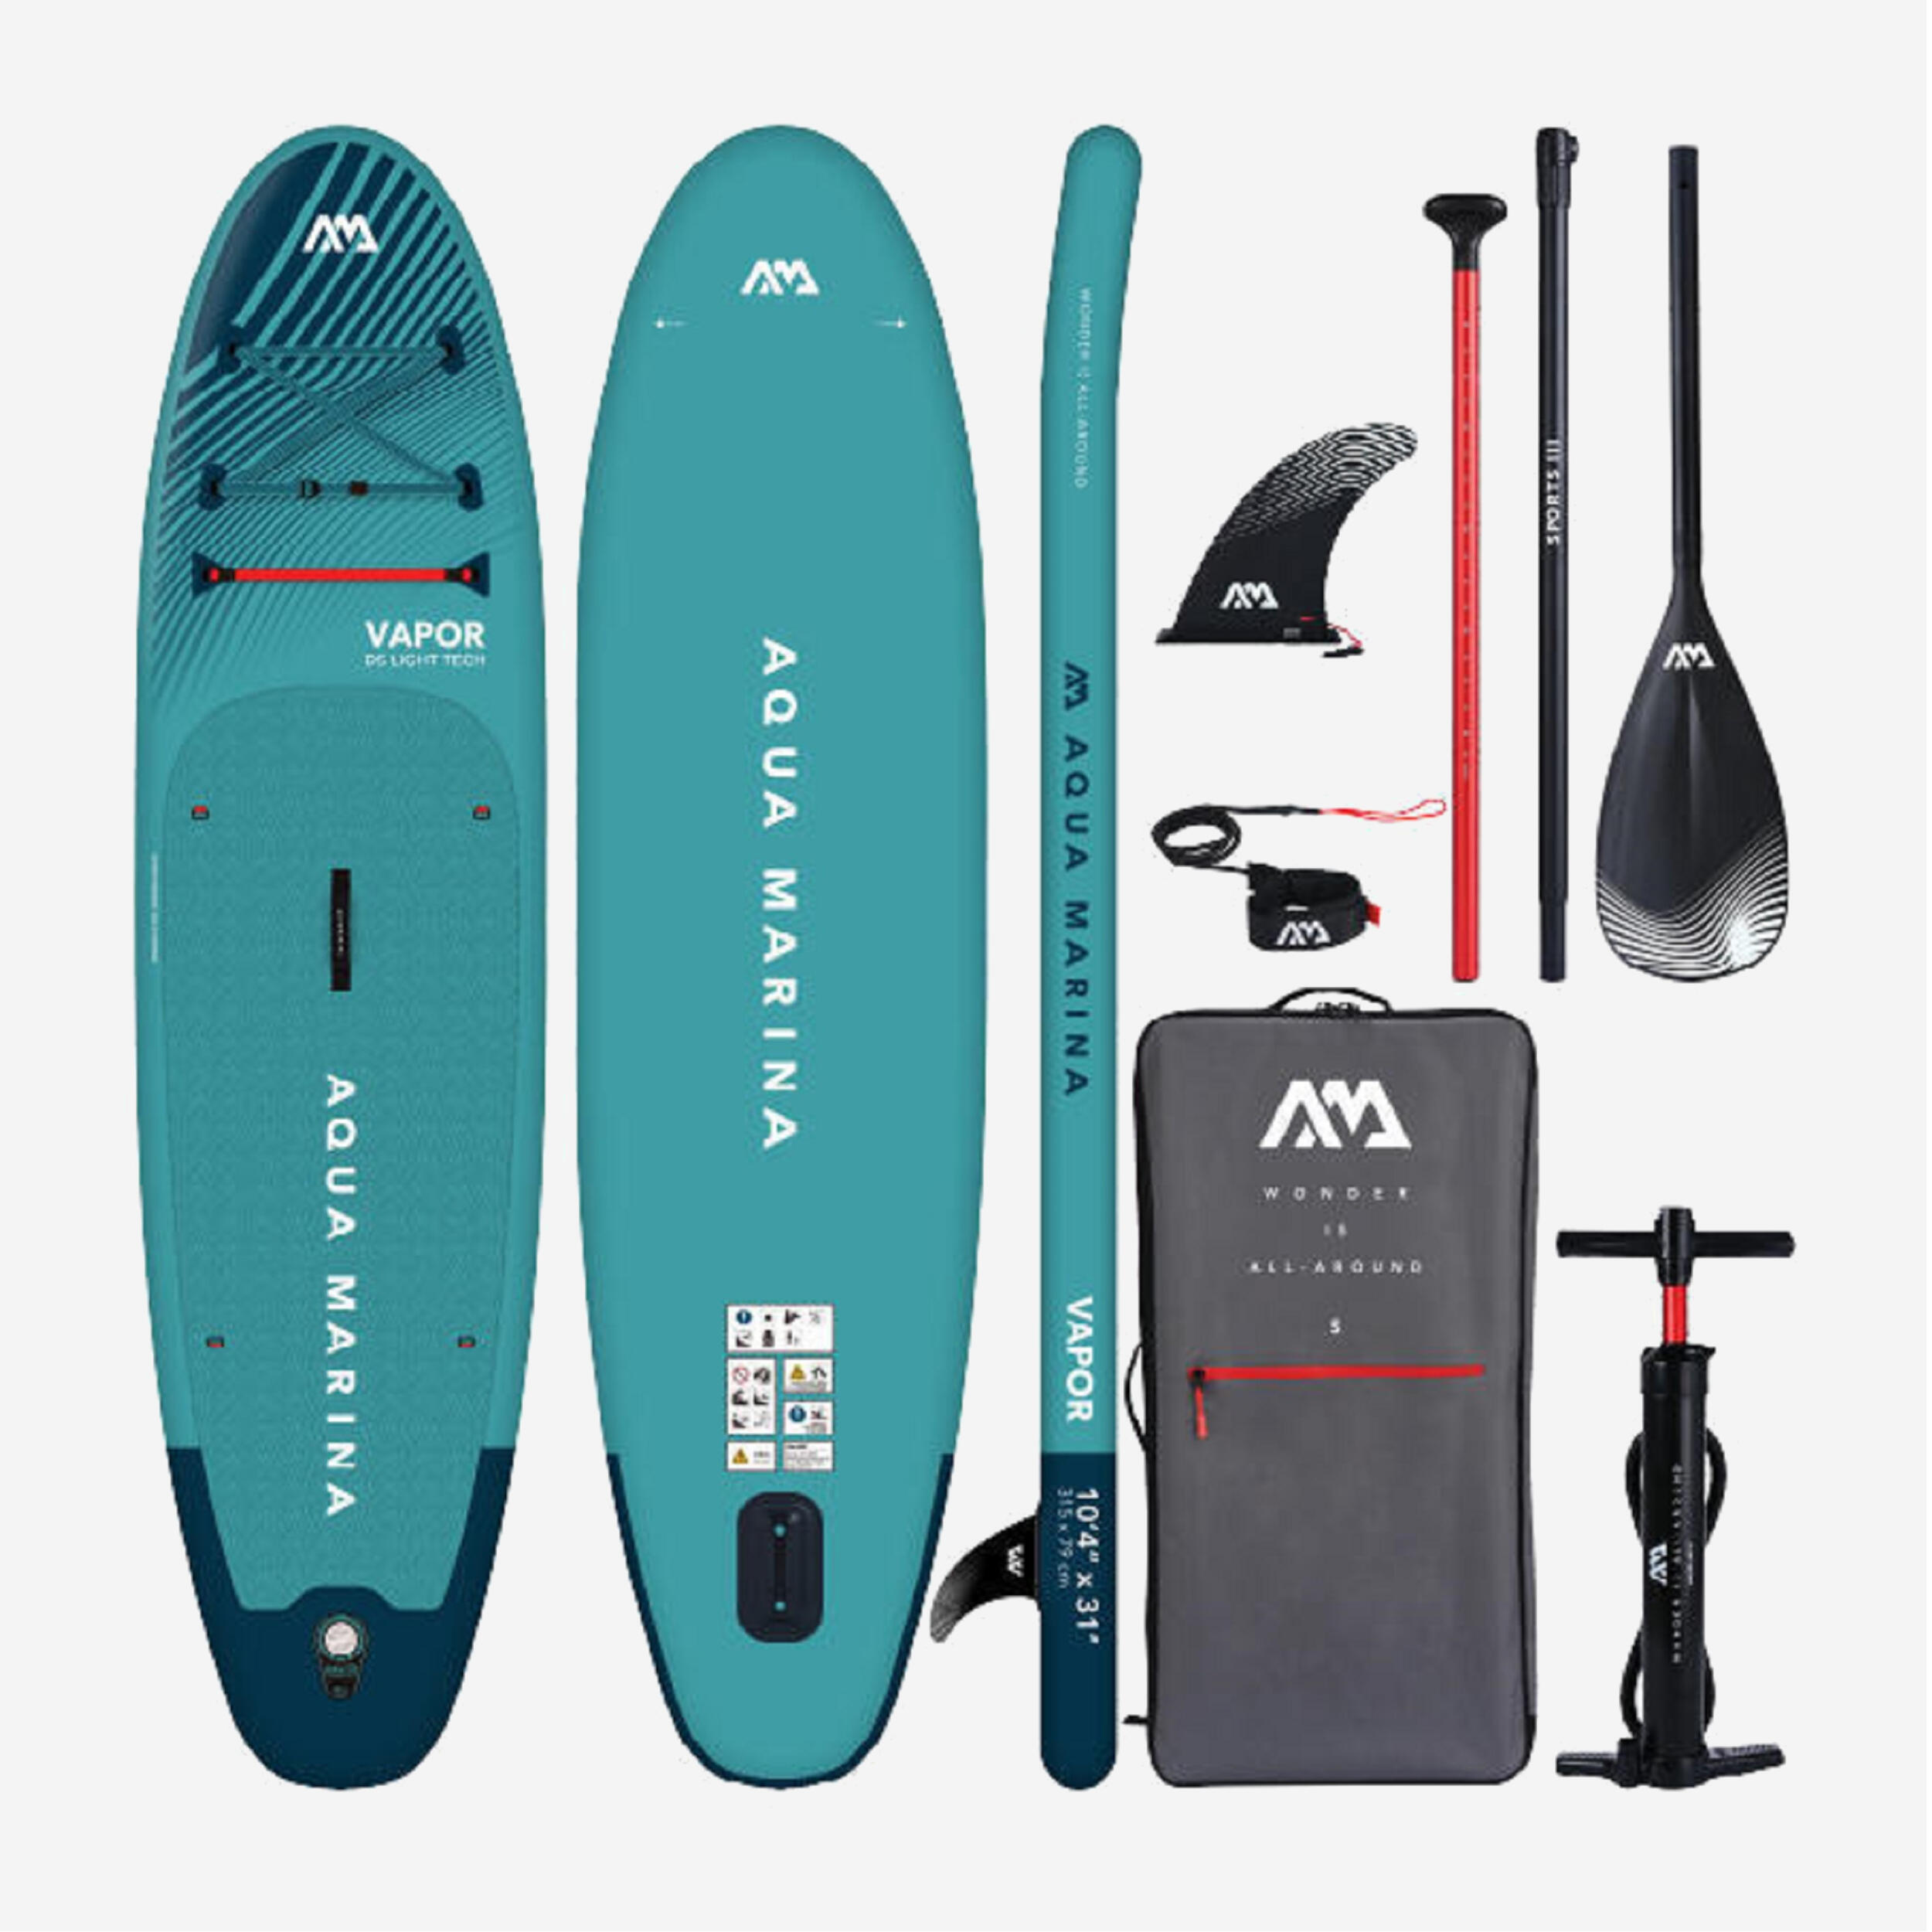 Aqua Marina Vapor stand-up paddle board package 10ft4/315cm 1/15